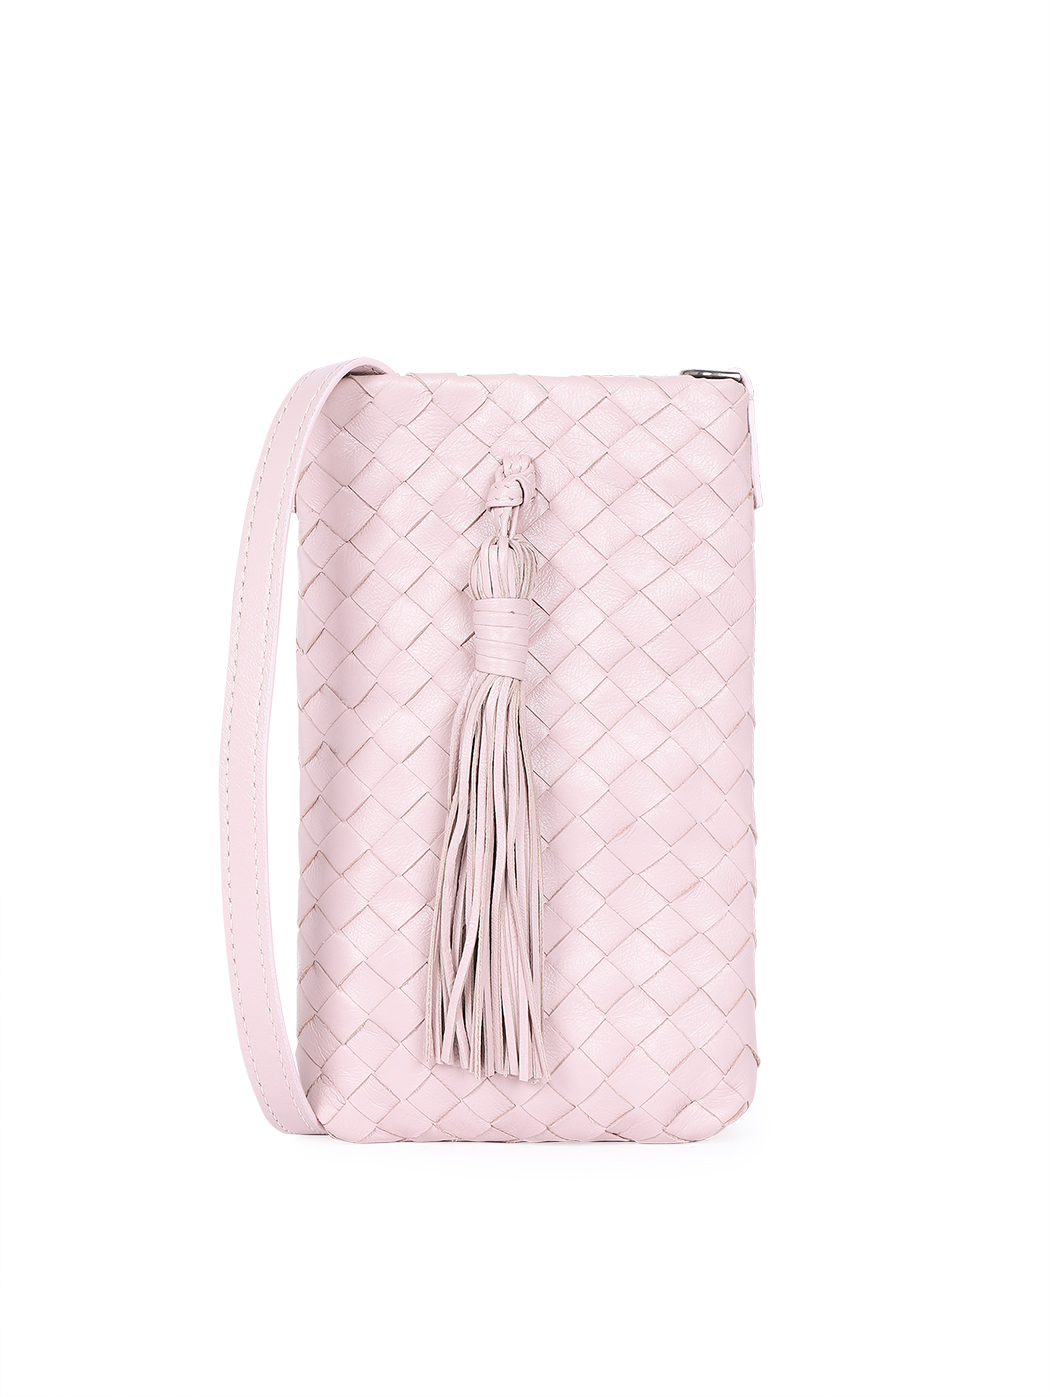 Crossbody Phone Bag Woven Leather Pink